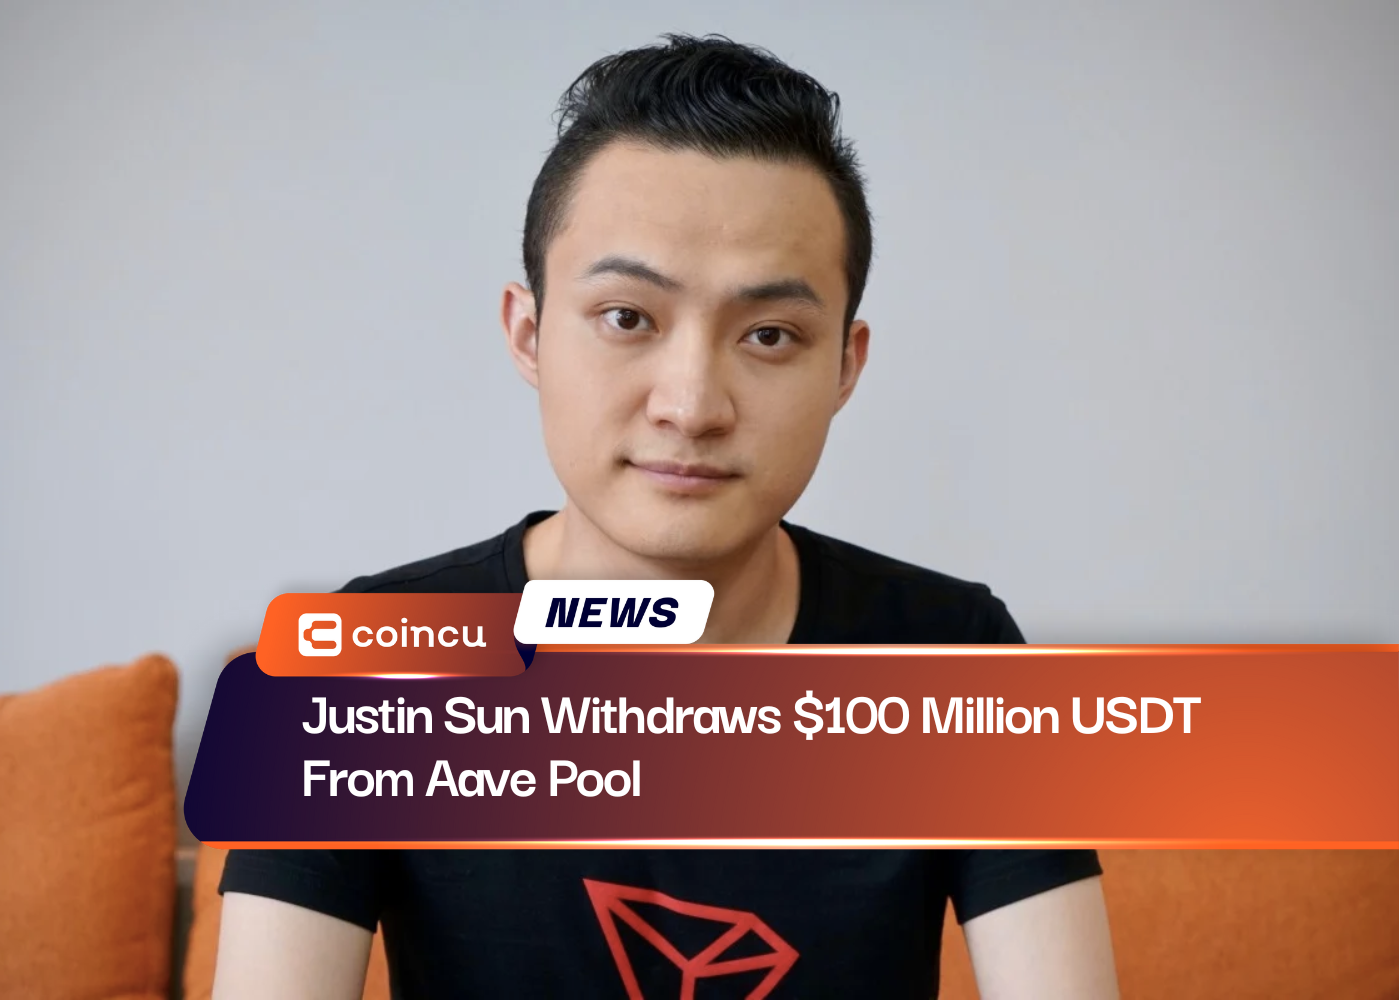 Justin Sun Withdraws $100 Million USDT From Aave Pool